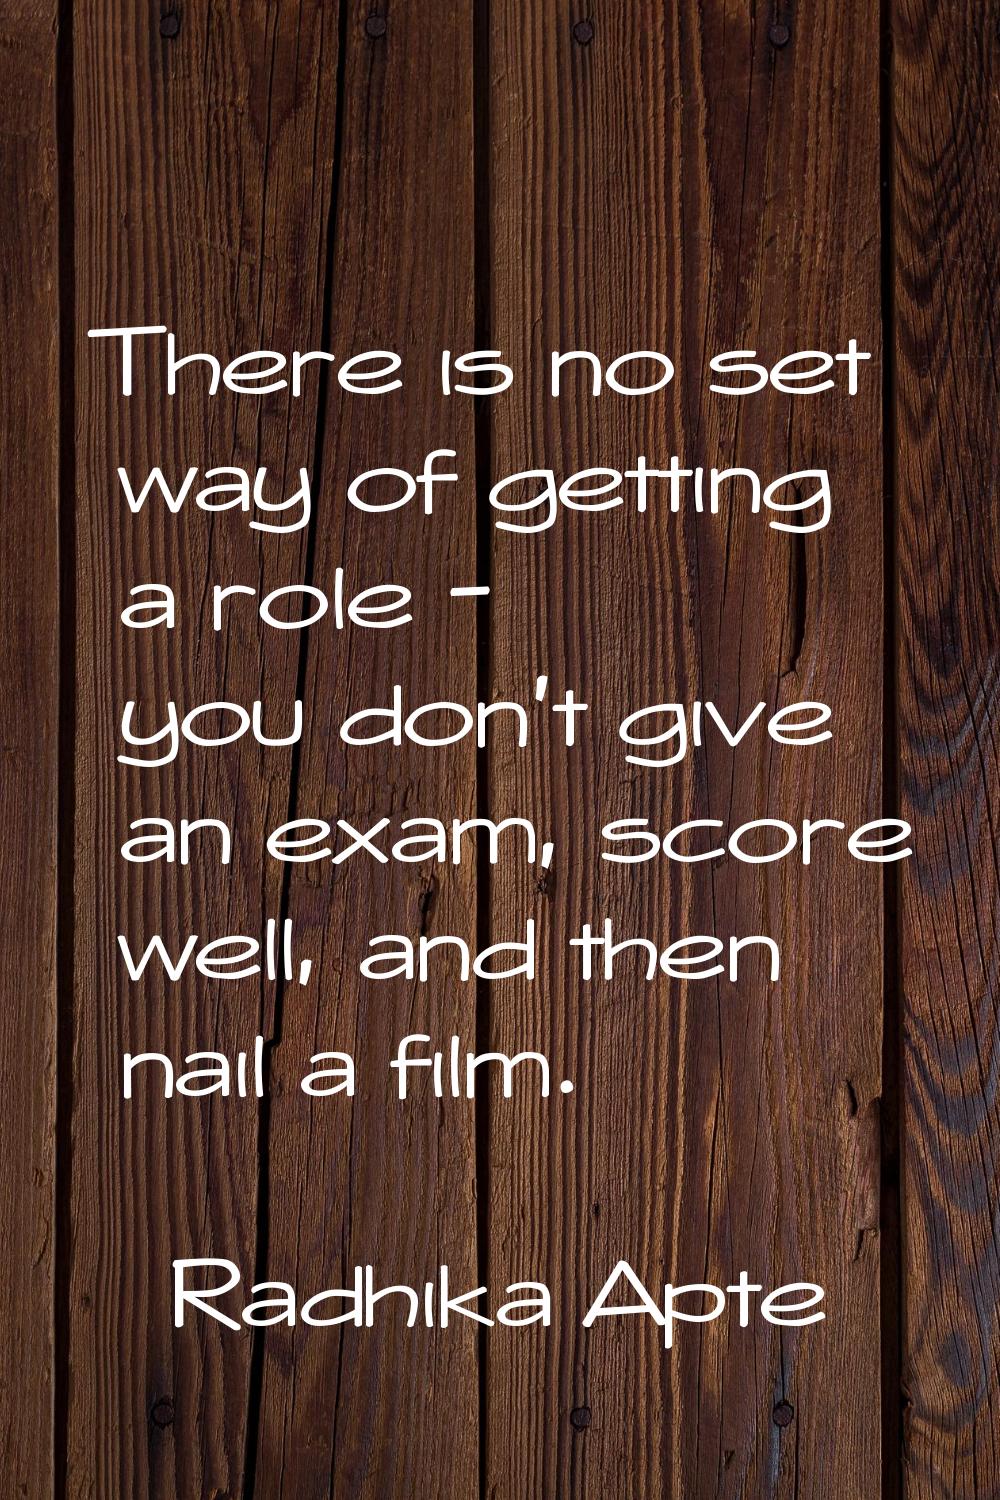 There is no set way of getting a role - you don't give an exam, score well, and then nail a film.